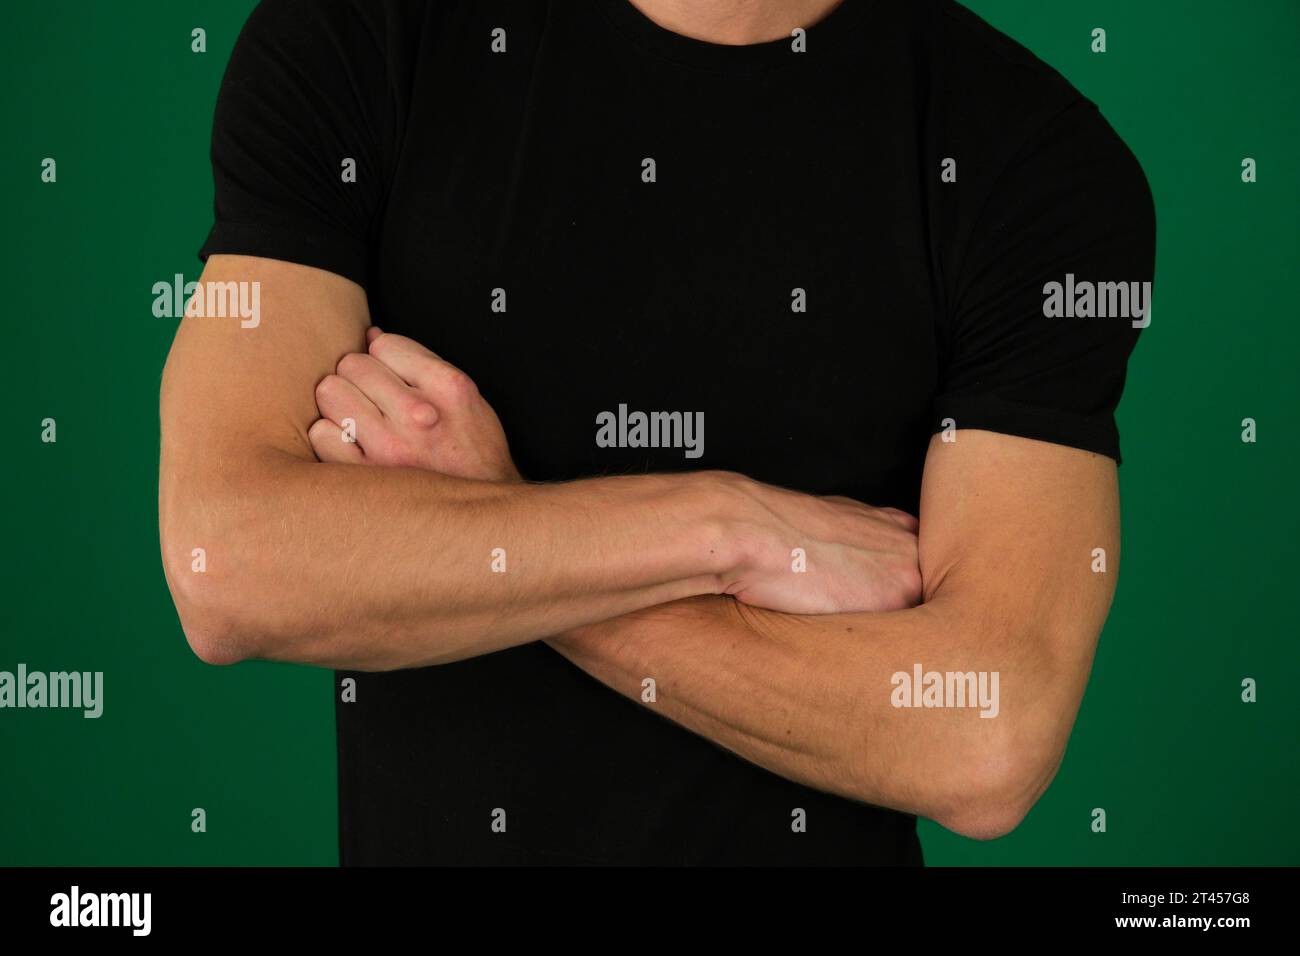 guy on a green background chromakey close-up dark hair young man. pumped up arms in a black T-shirt, recognizable peopl Stock Photo